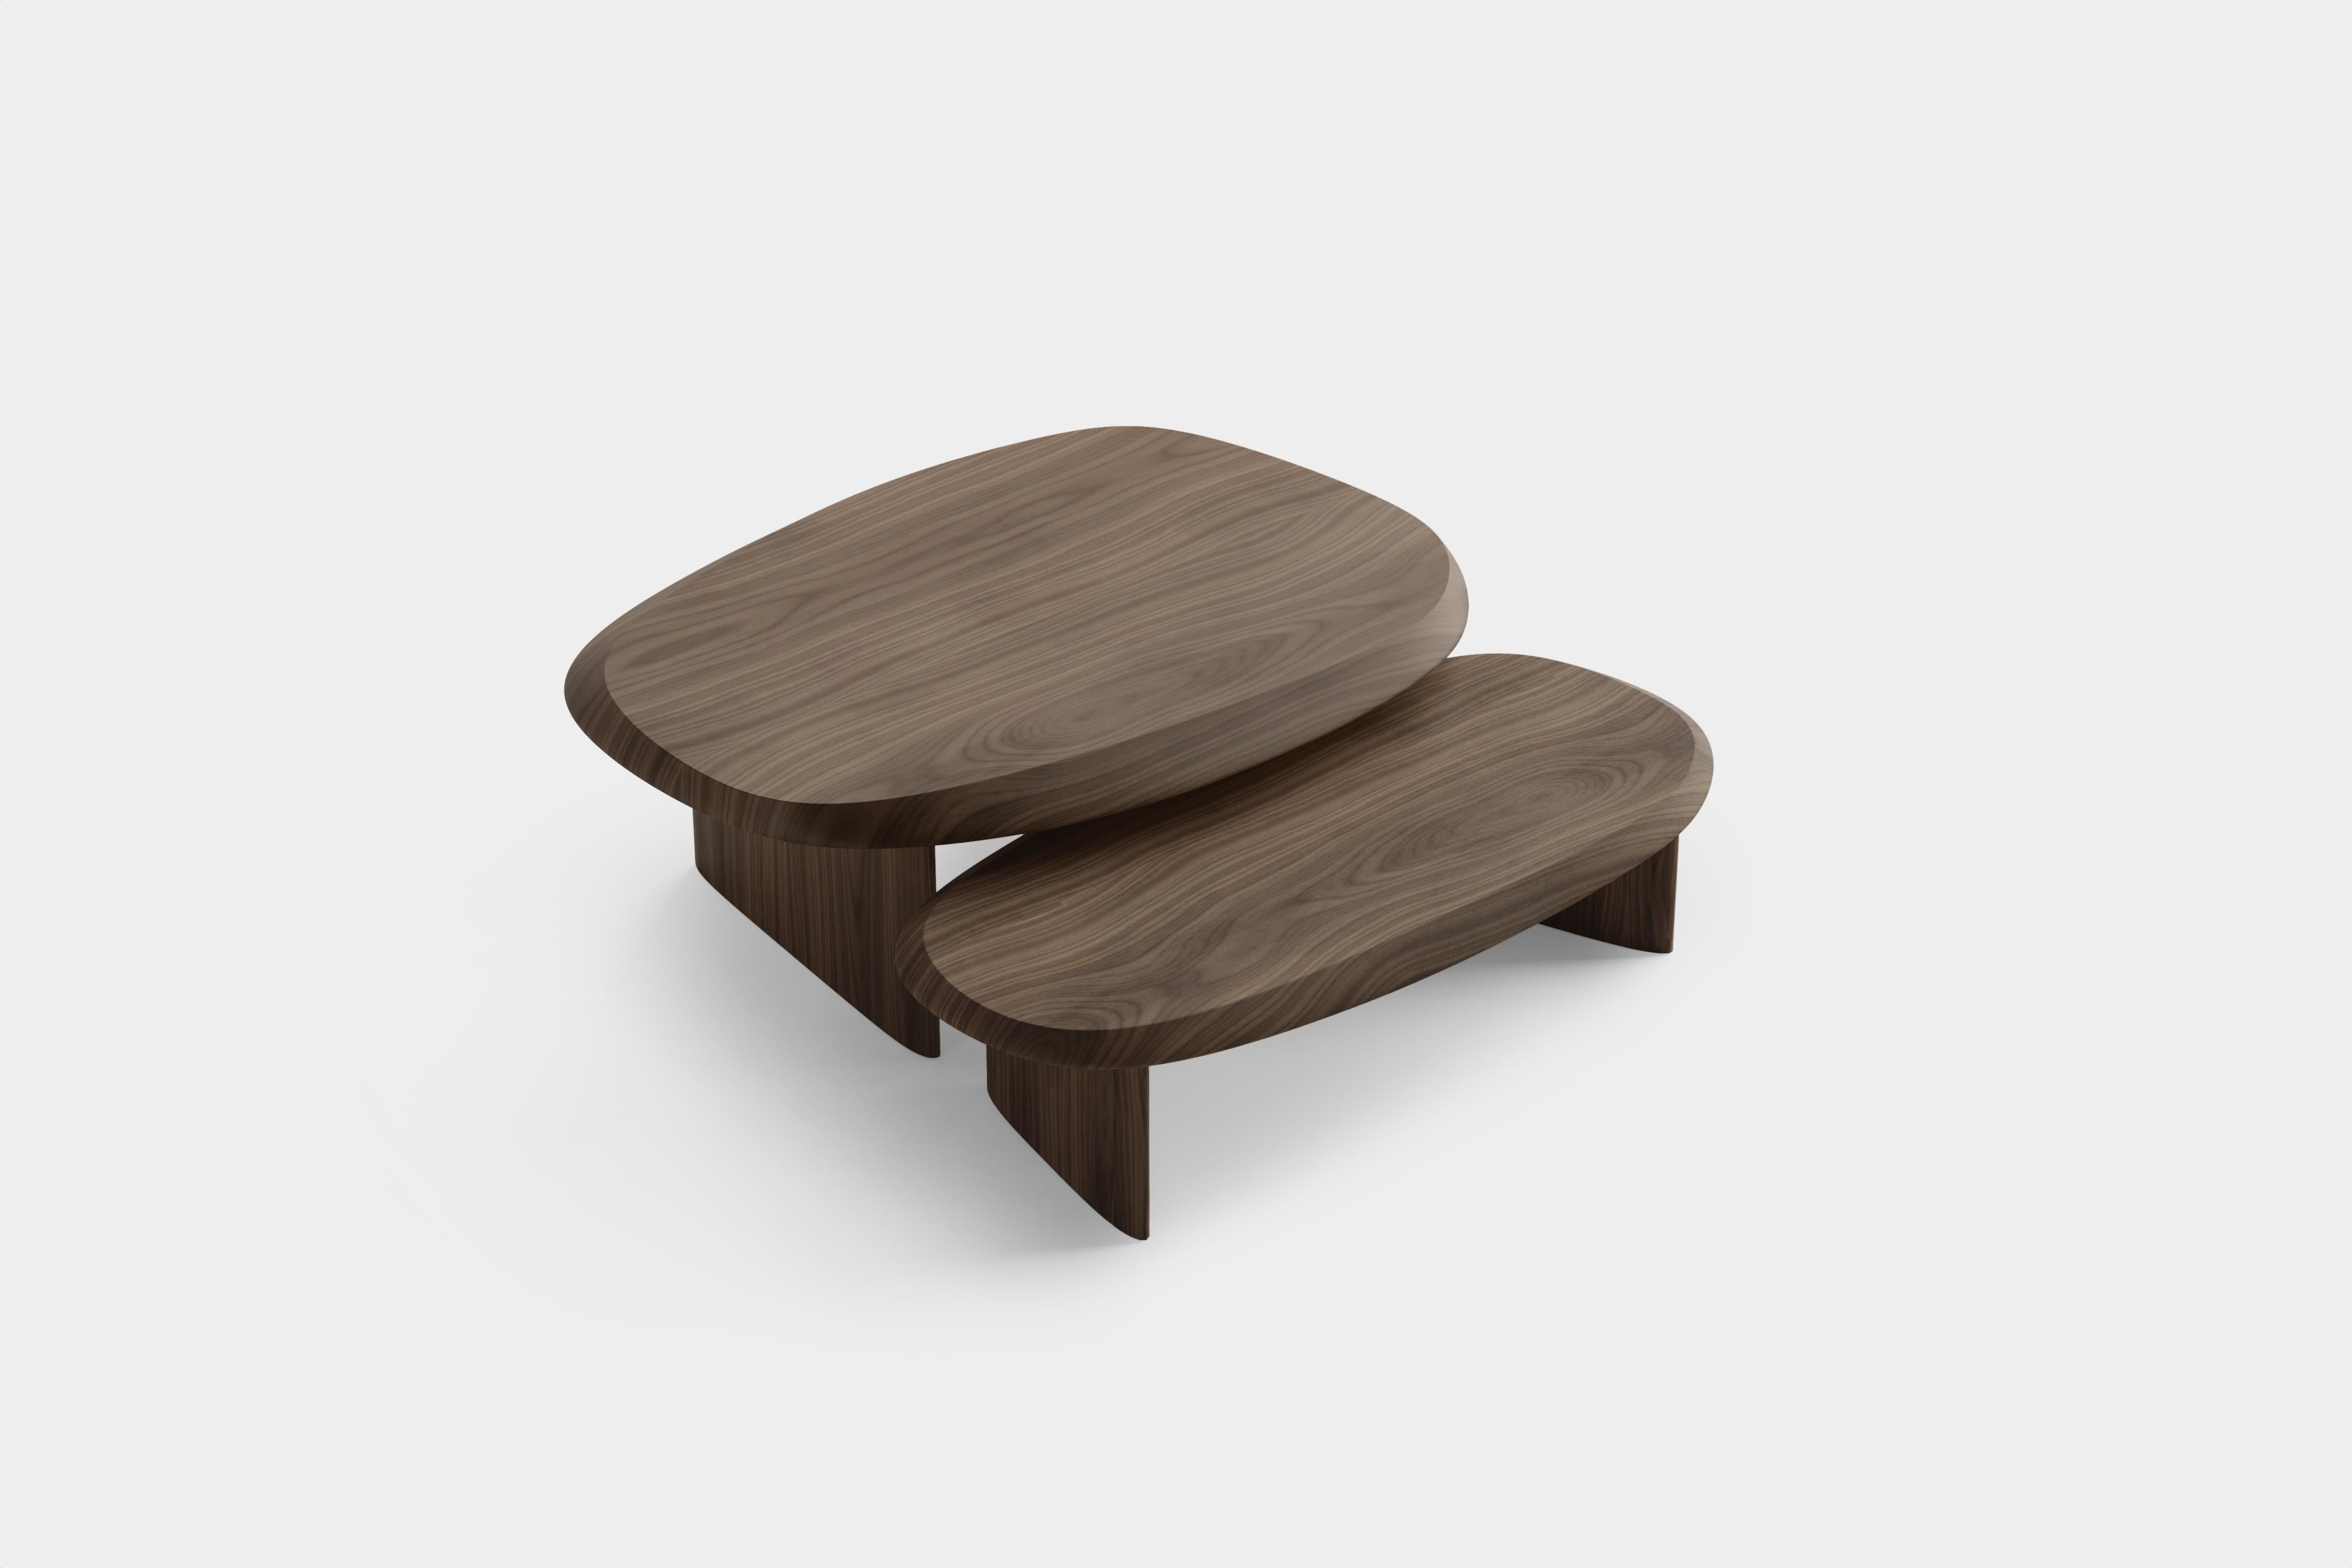 Set of 2 Duna Coffee Tables in Solid Walnut Wood, Coffee Table by Joel Escalona For Sale 2